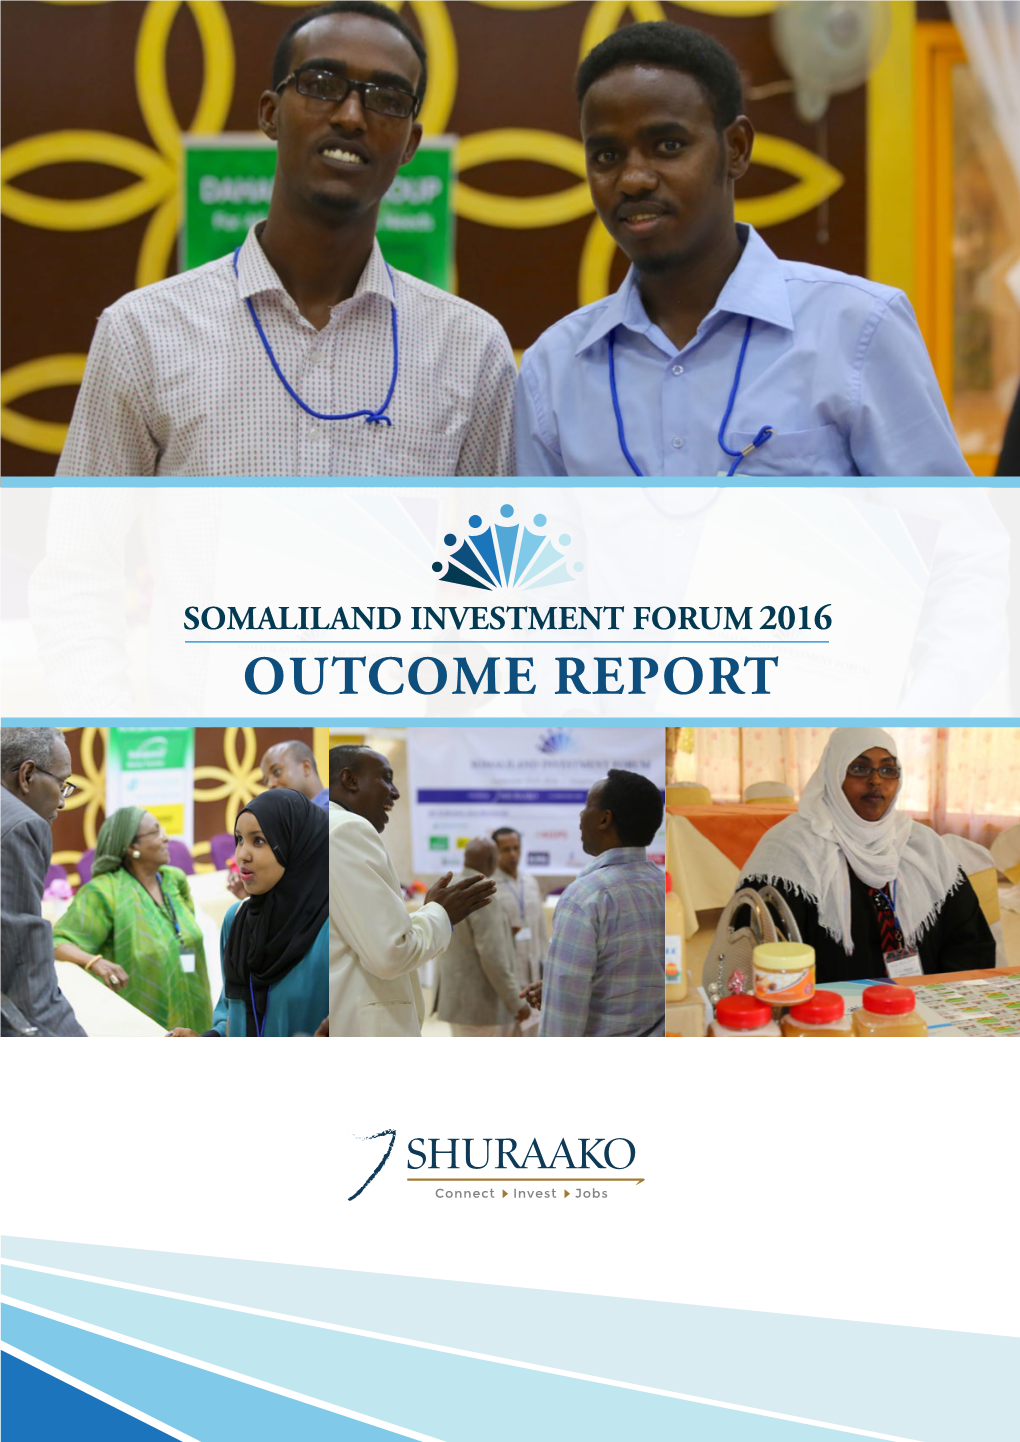 OUTCOME REPORT This Outcome Report Is the Result of the Somaliland Investment Forum Hargeisa Held on September 19-21, 2016